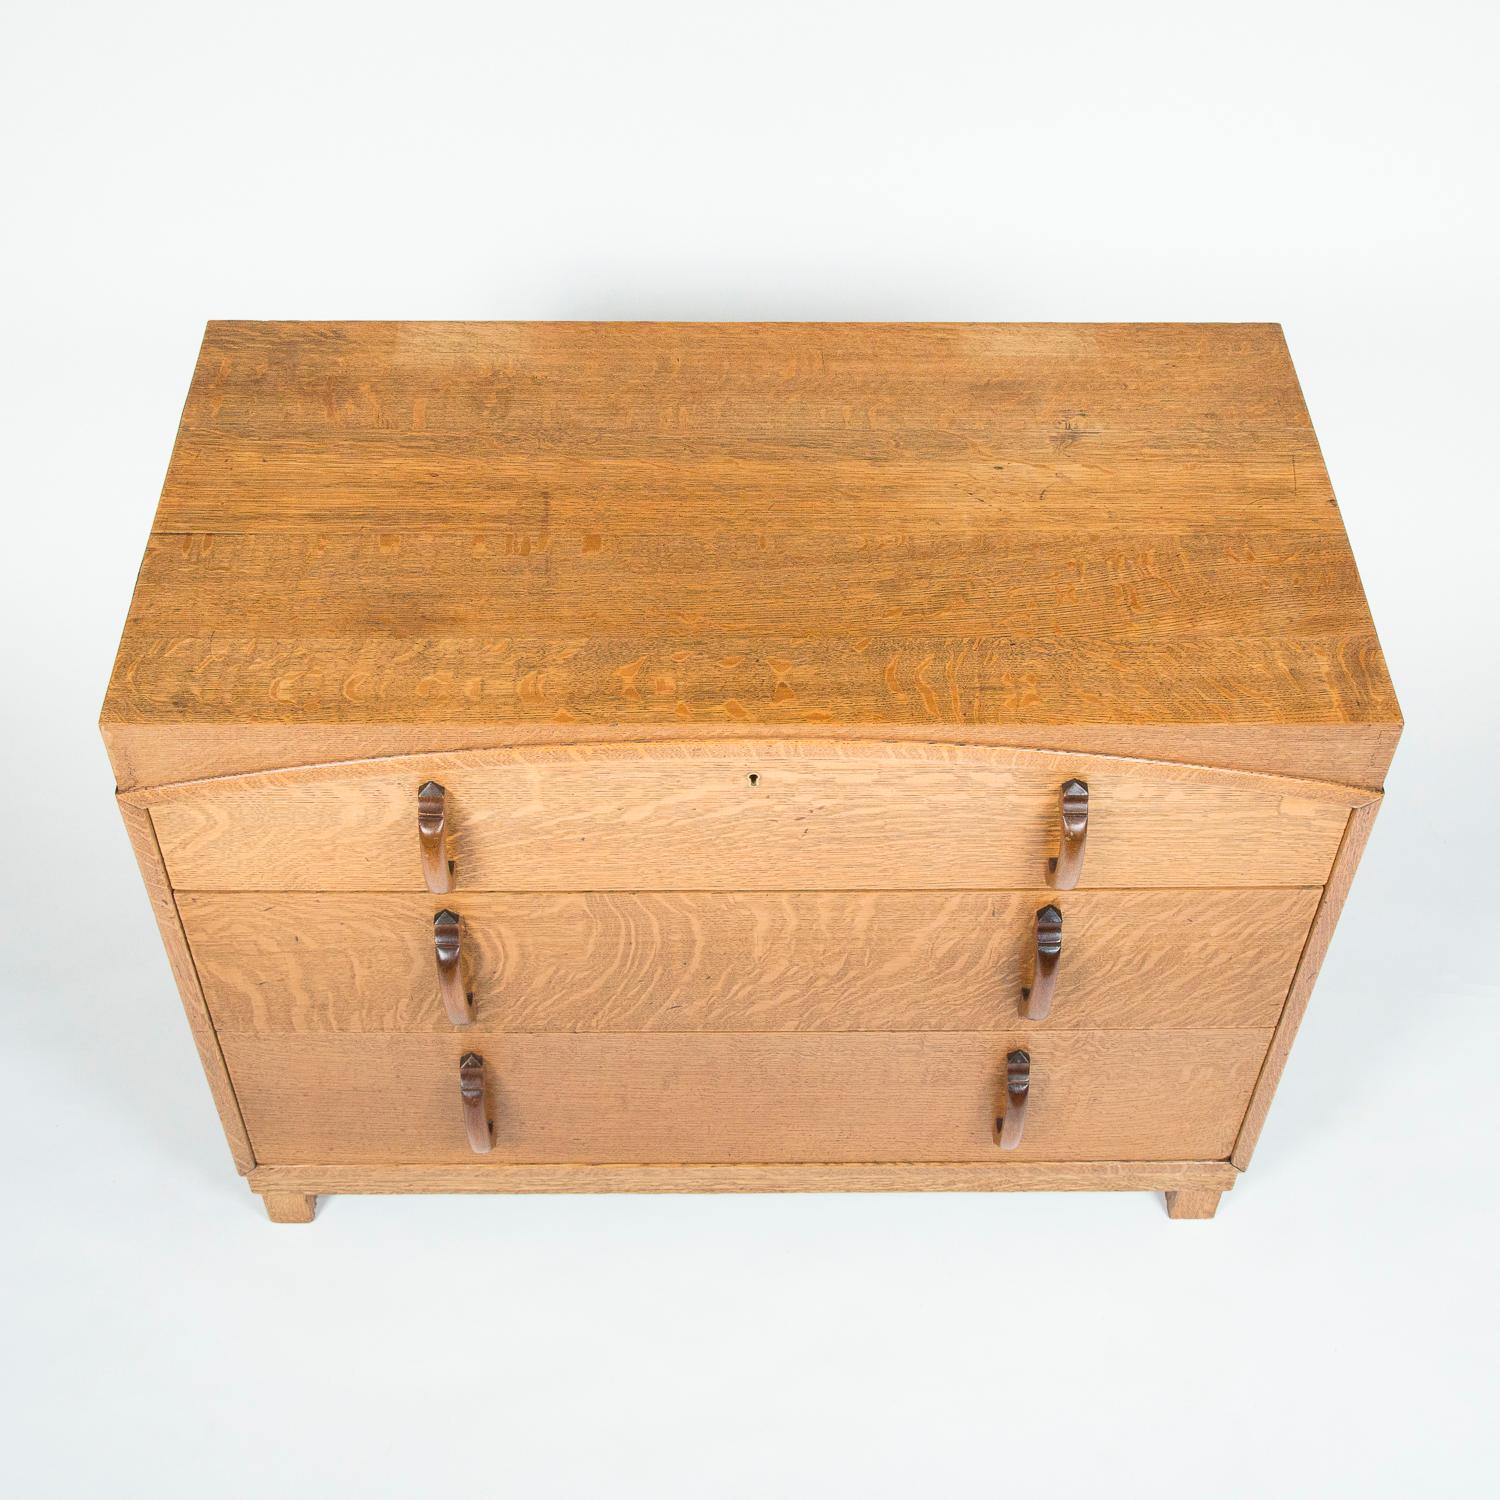 English Oak chest of drawers 